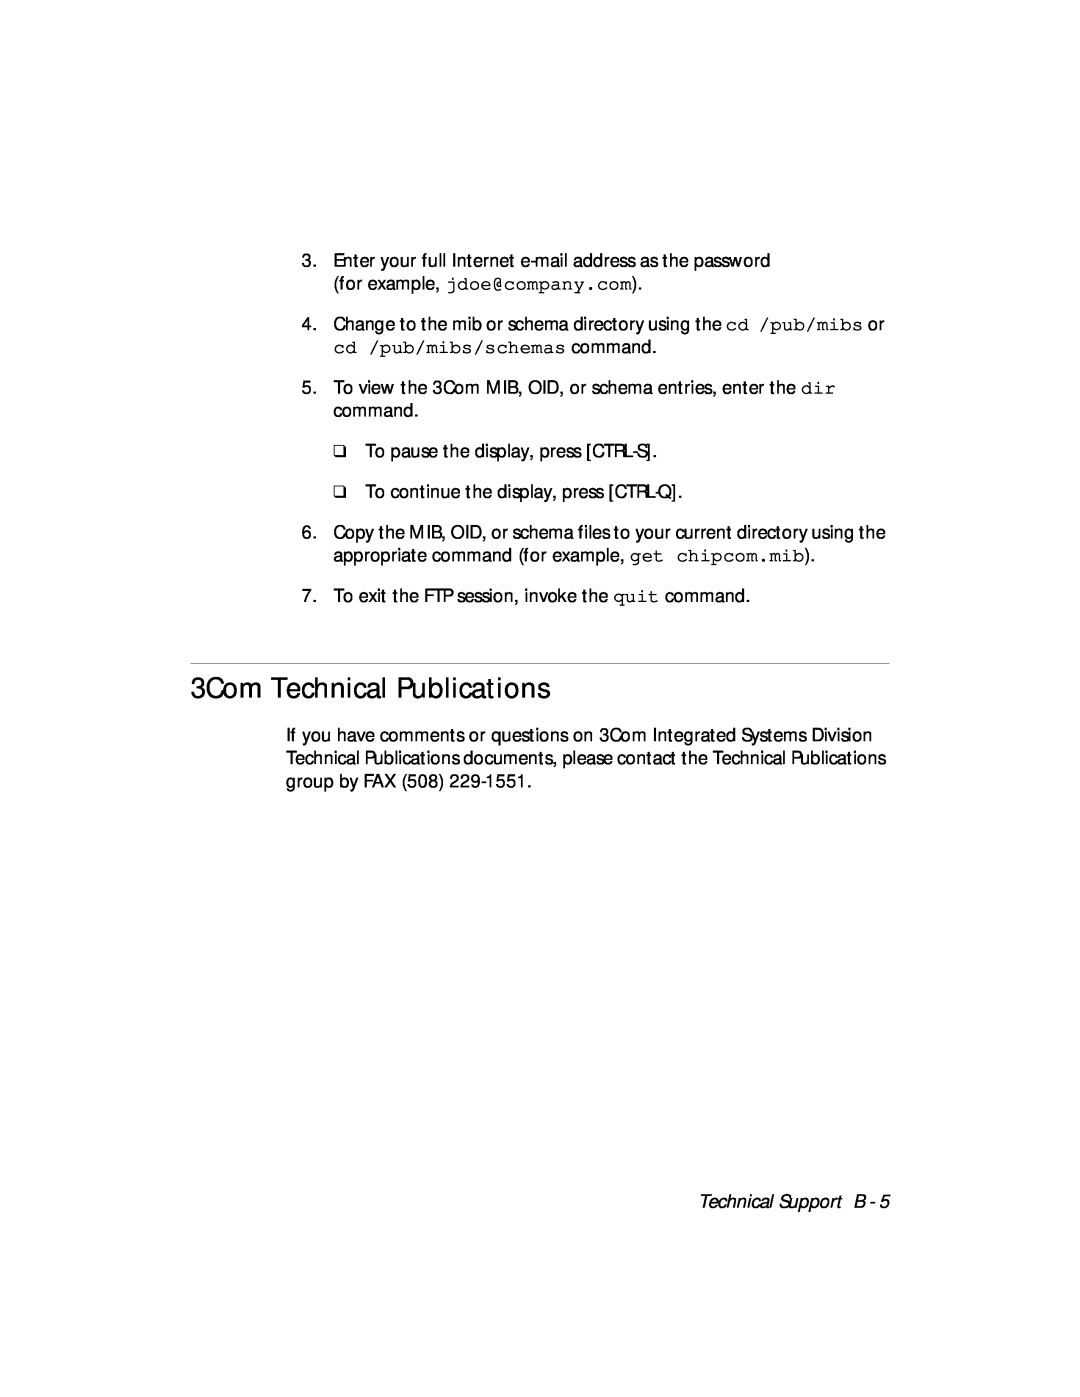 3Com 5112M-TPLS installation and operation guide 3Com Technical Publications, Technical Support B 